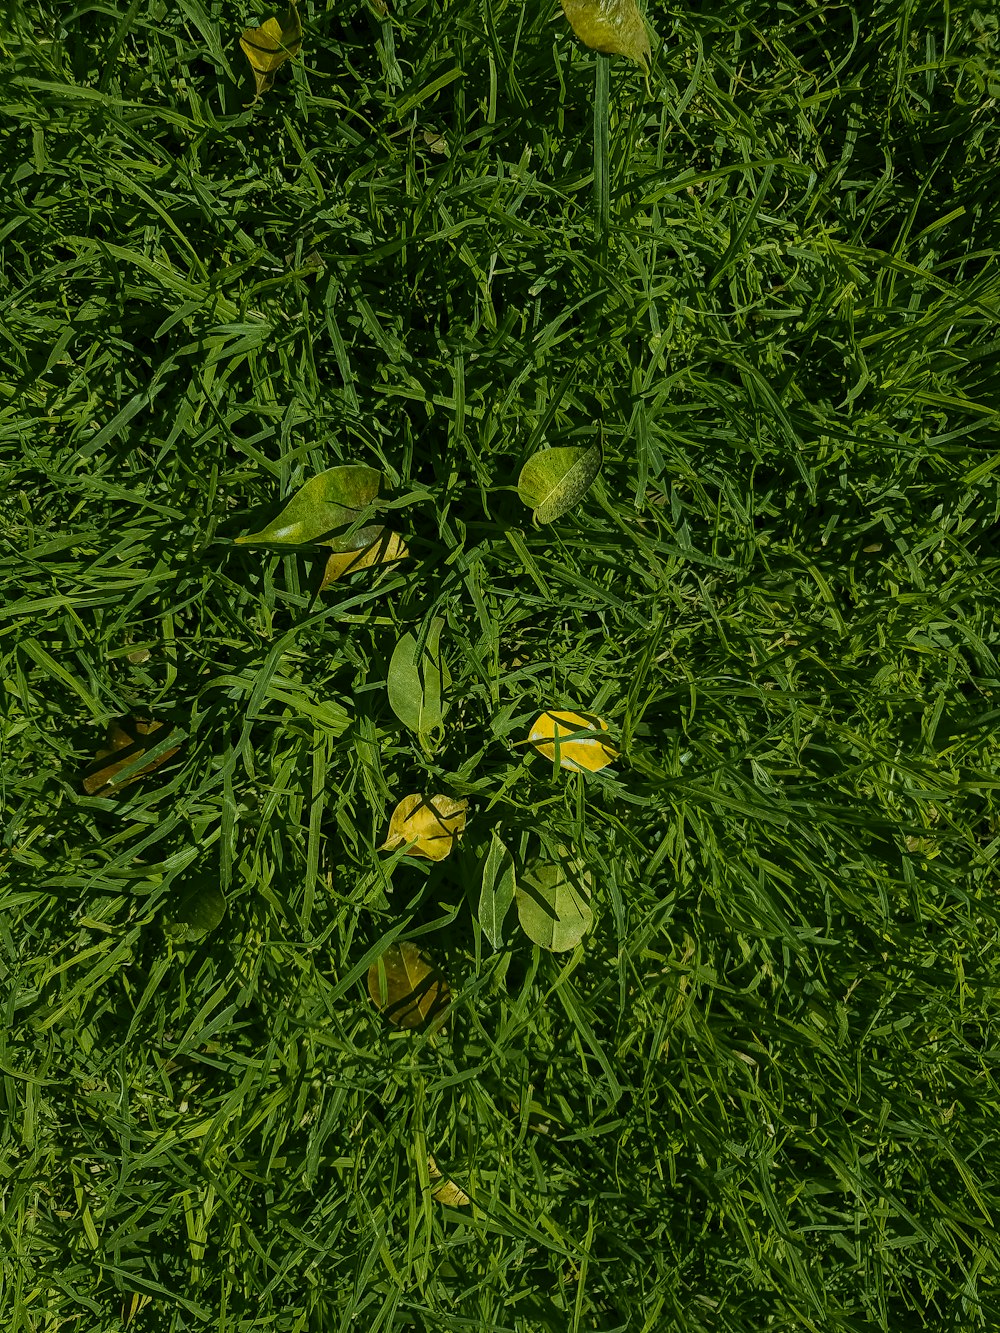 a patch of green grass with yellow flowers